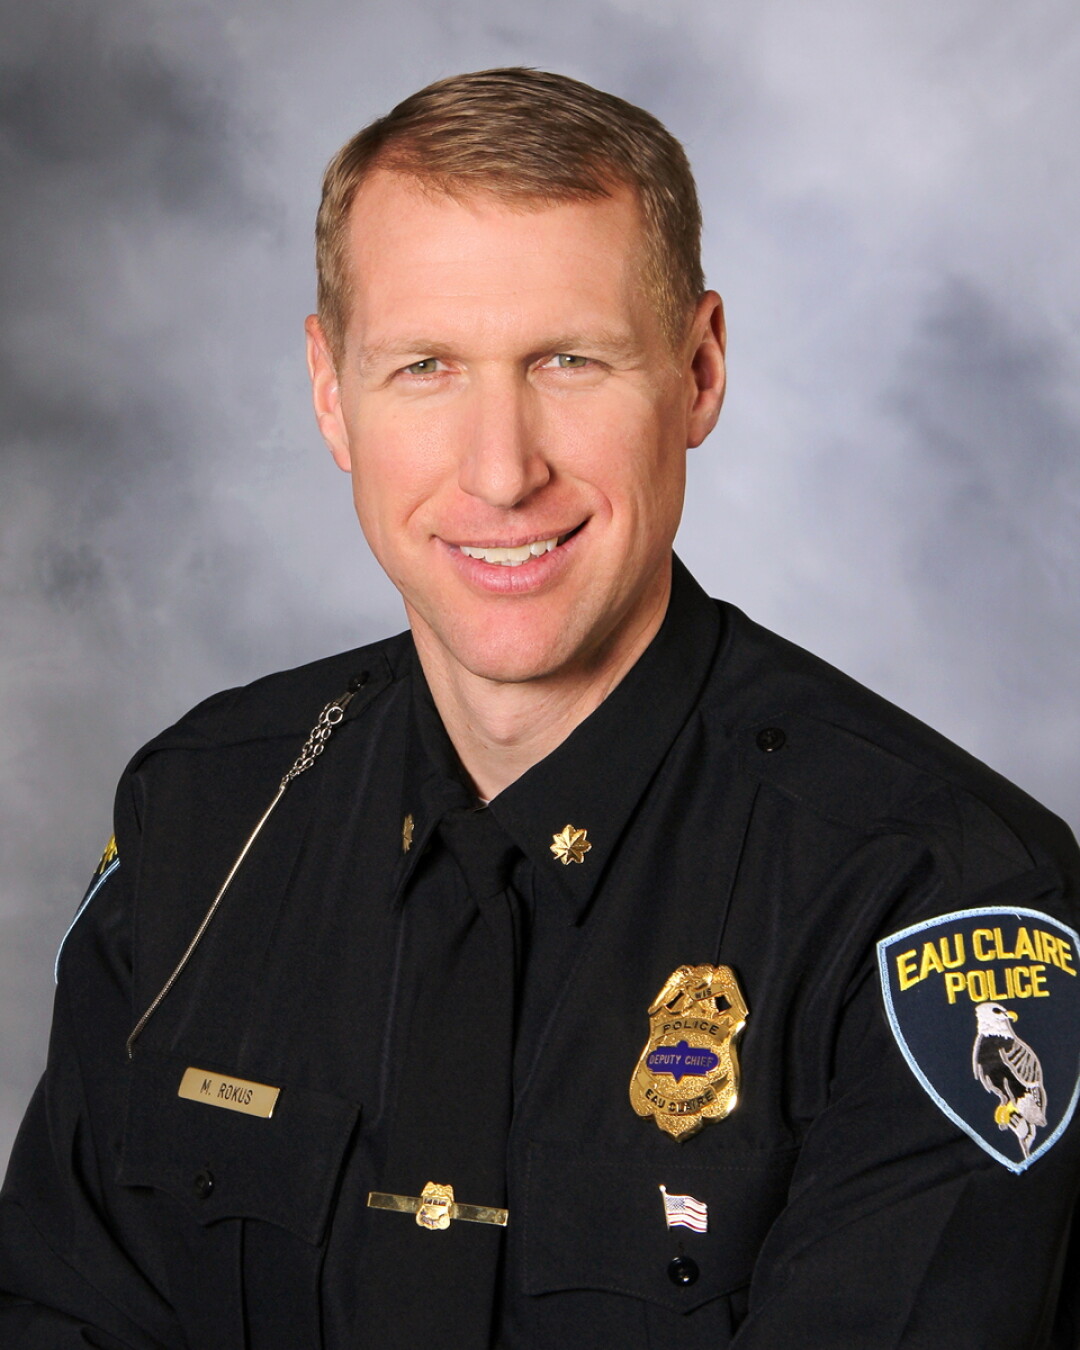 Matt Rokus, Police Chief for the Eau Claire Police Department, 